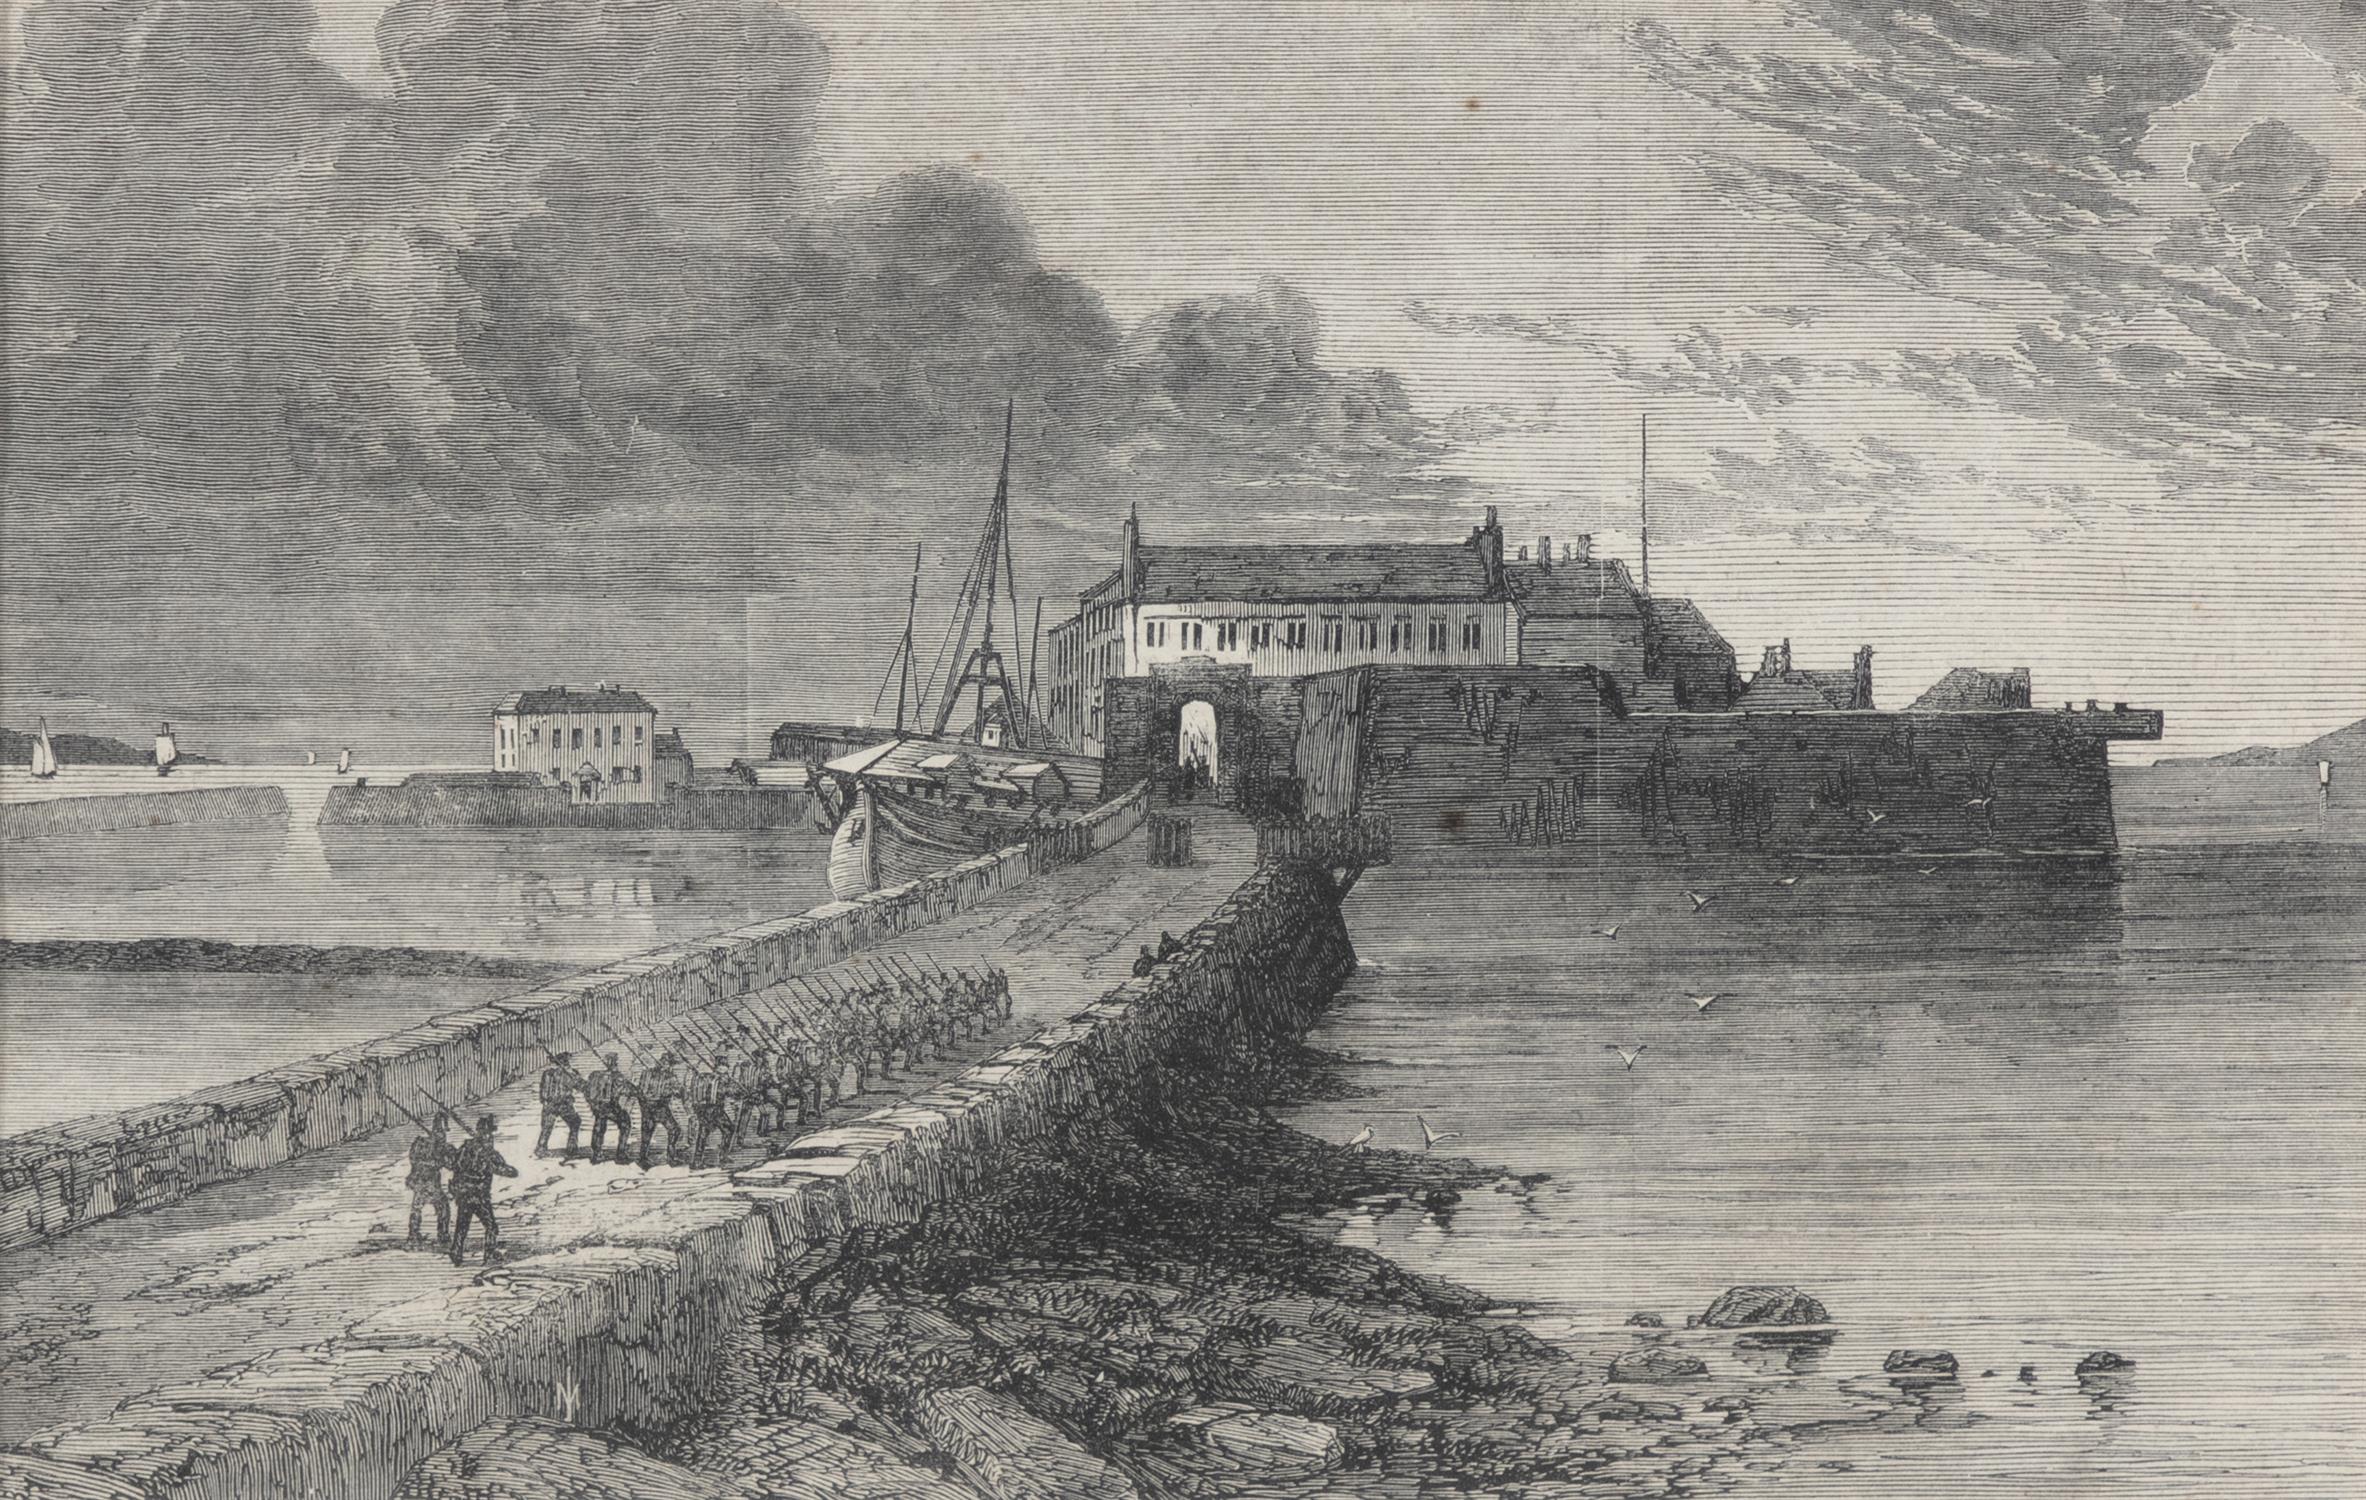 THE ILLUSTRATED LONDON NEWS The Pigeon House Fort, 1866 Engraving 14 x 22 cm - Image 3 of 4